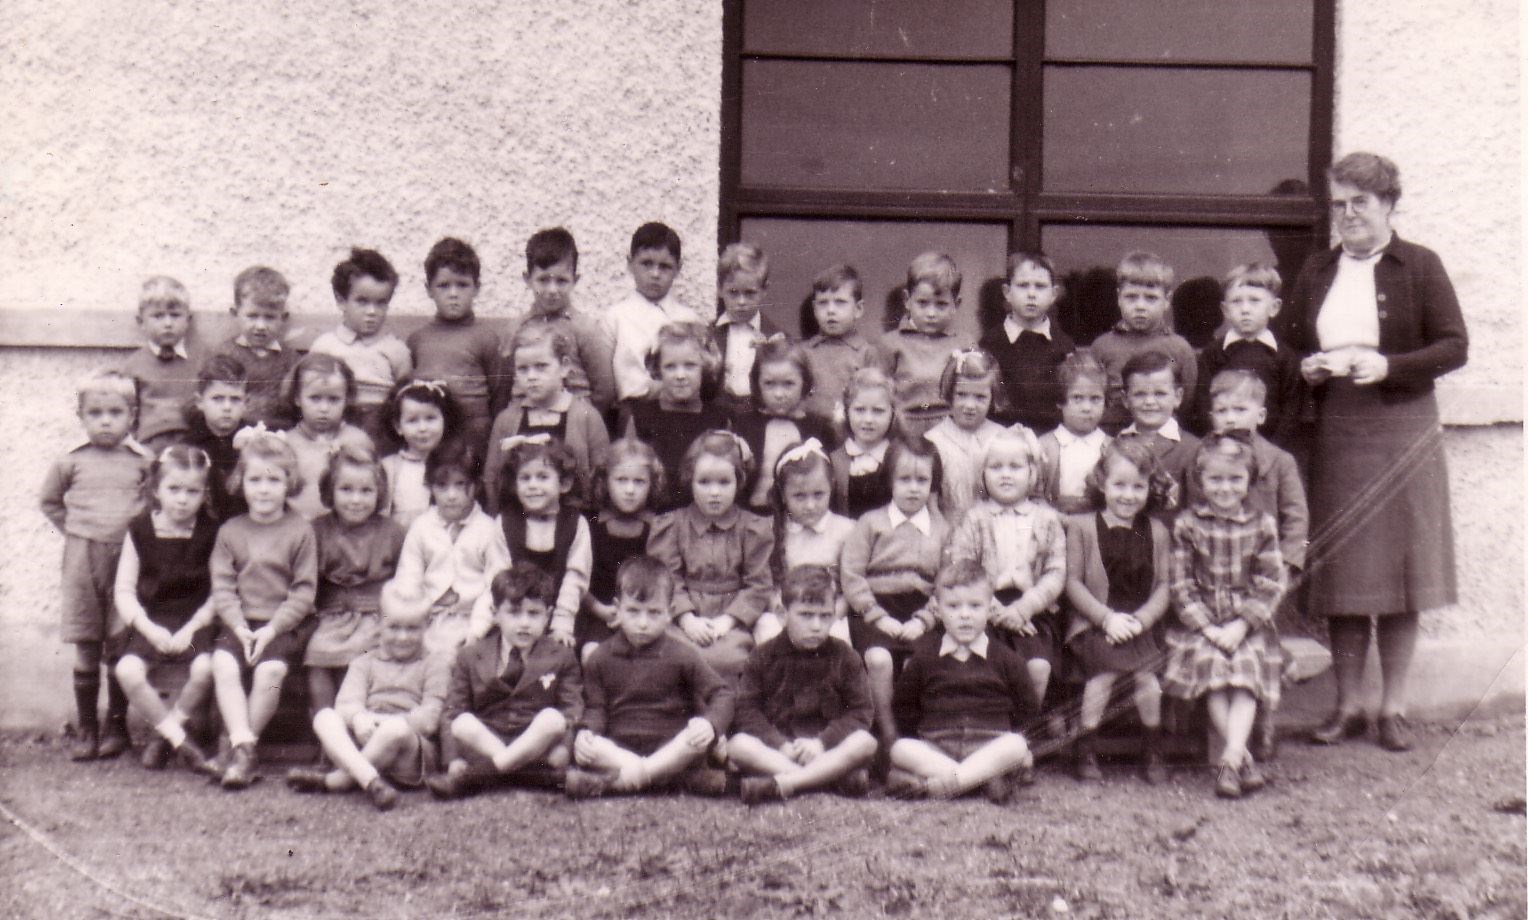 Pictured is the Primary One class in Dingwall Academy circa 1946. The names of the pupils remembered are as follows: Miss Allan, Iain Fraser, John Lawson, Ian McFarlane, Freddie McLeod, Ian McFarlane, Scott Reid, Sandra MacRae, Annabell Fisher, Isobel Lawson, Monica Mathieson, Sheila MacKay, Alexia Boyle, Marguerite Ross, Cary McLean, Myra Bremner. Anne Gow, Sandy Beattie, Catherine Mowat, Sheila Williamson, Rosemary Chiisholm, William Forsyth and Raymond Russell..Picture courtesy of Marguerite Ross, Dingwall...